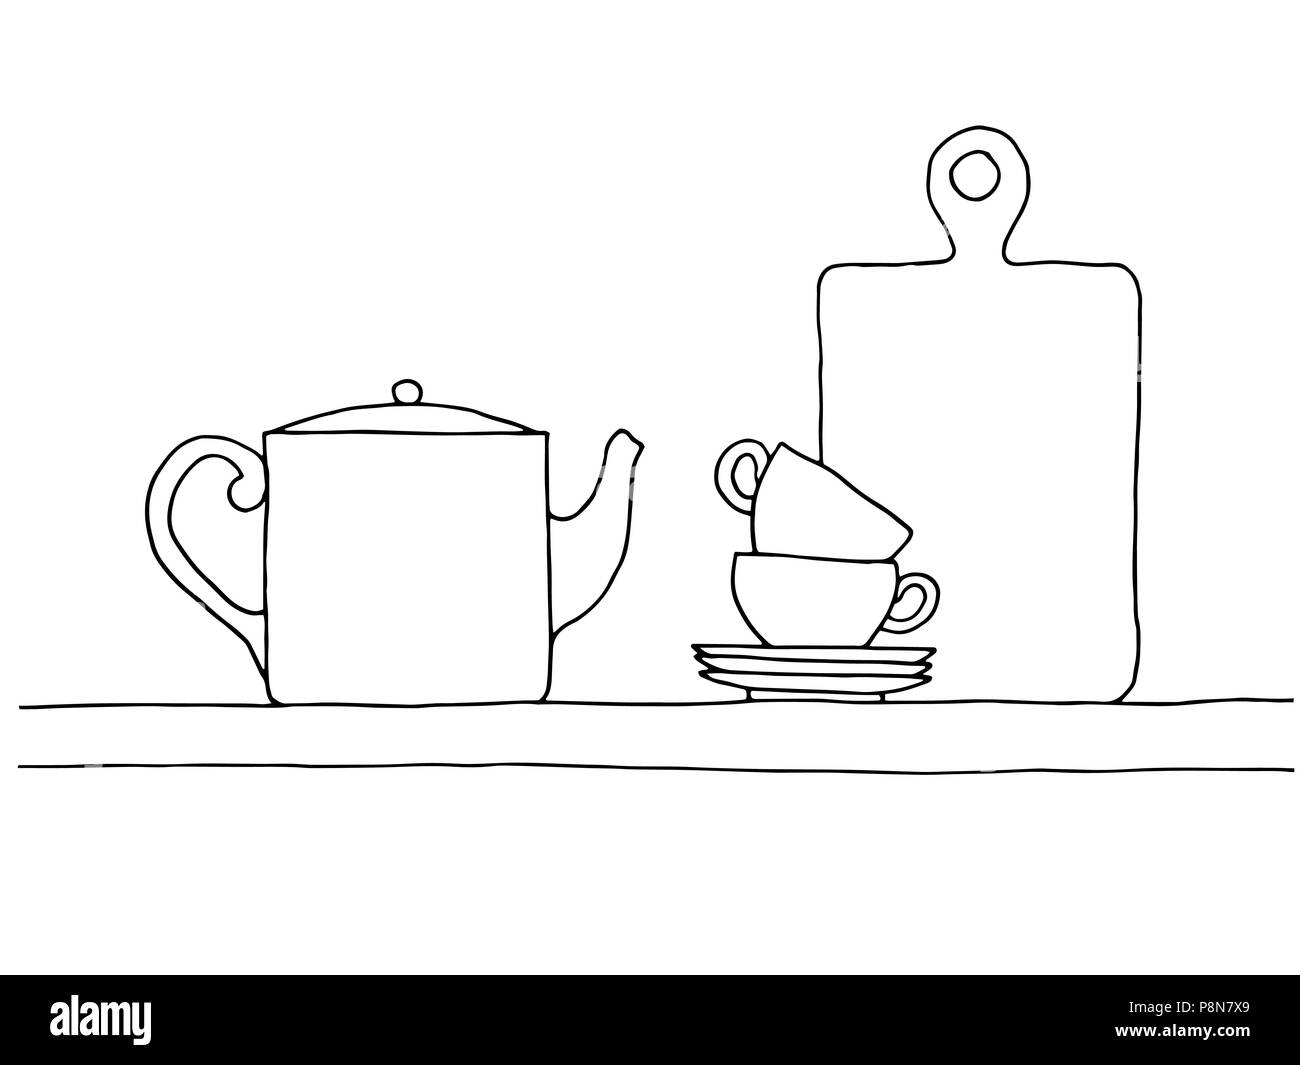 Sketch of a shelf with a kettle, cups and a cutting board. Vector illustration. Stock Vector